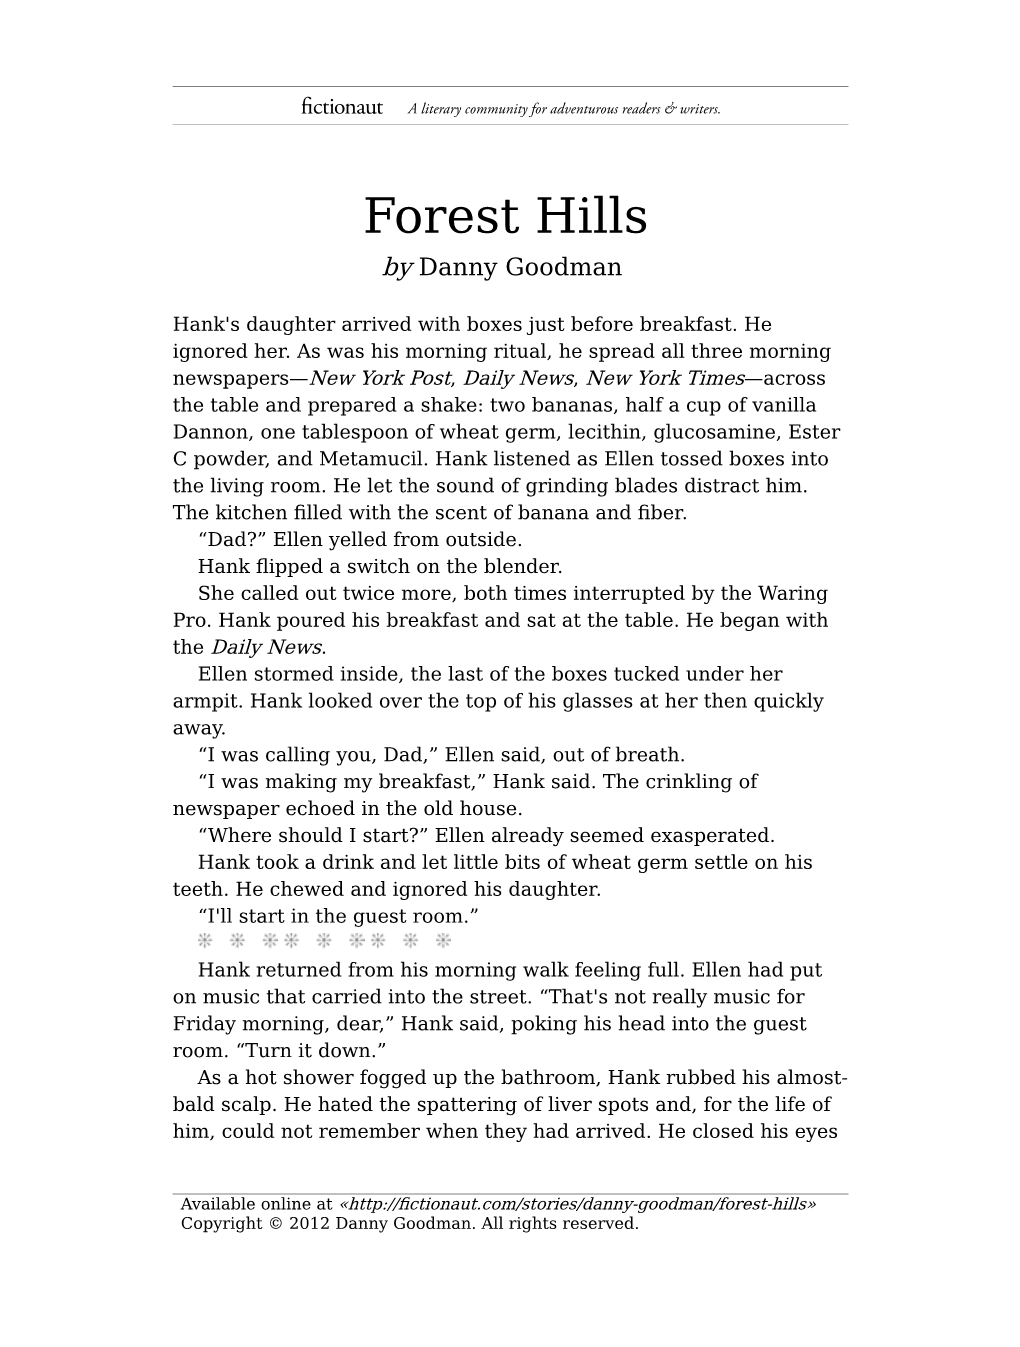 Forest Hills by Danny Goodman